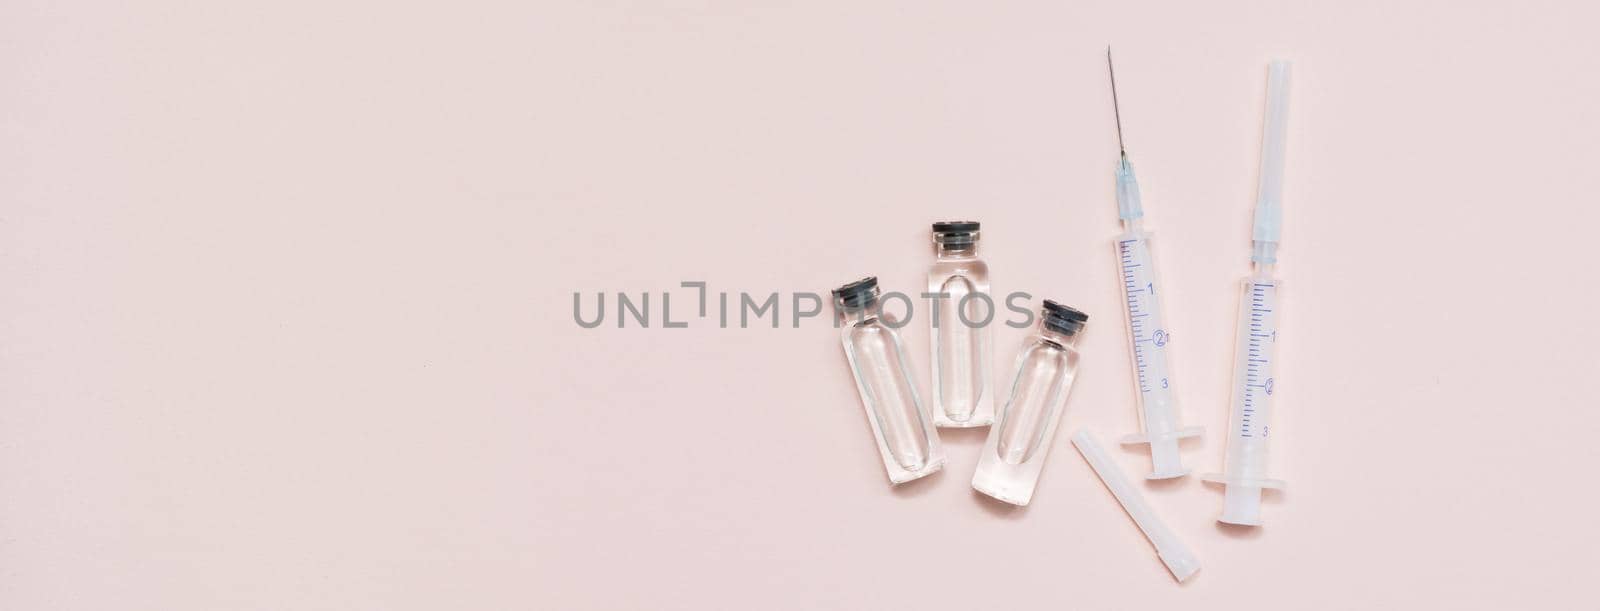 Vaccination and Immunization. Vaccine vials and clean syringes. Top view. Copy space. Web banner